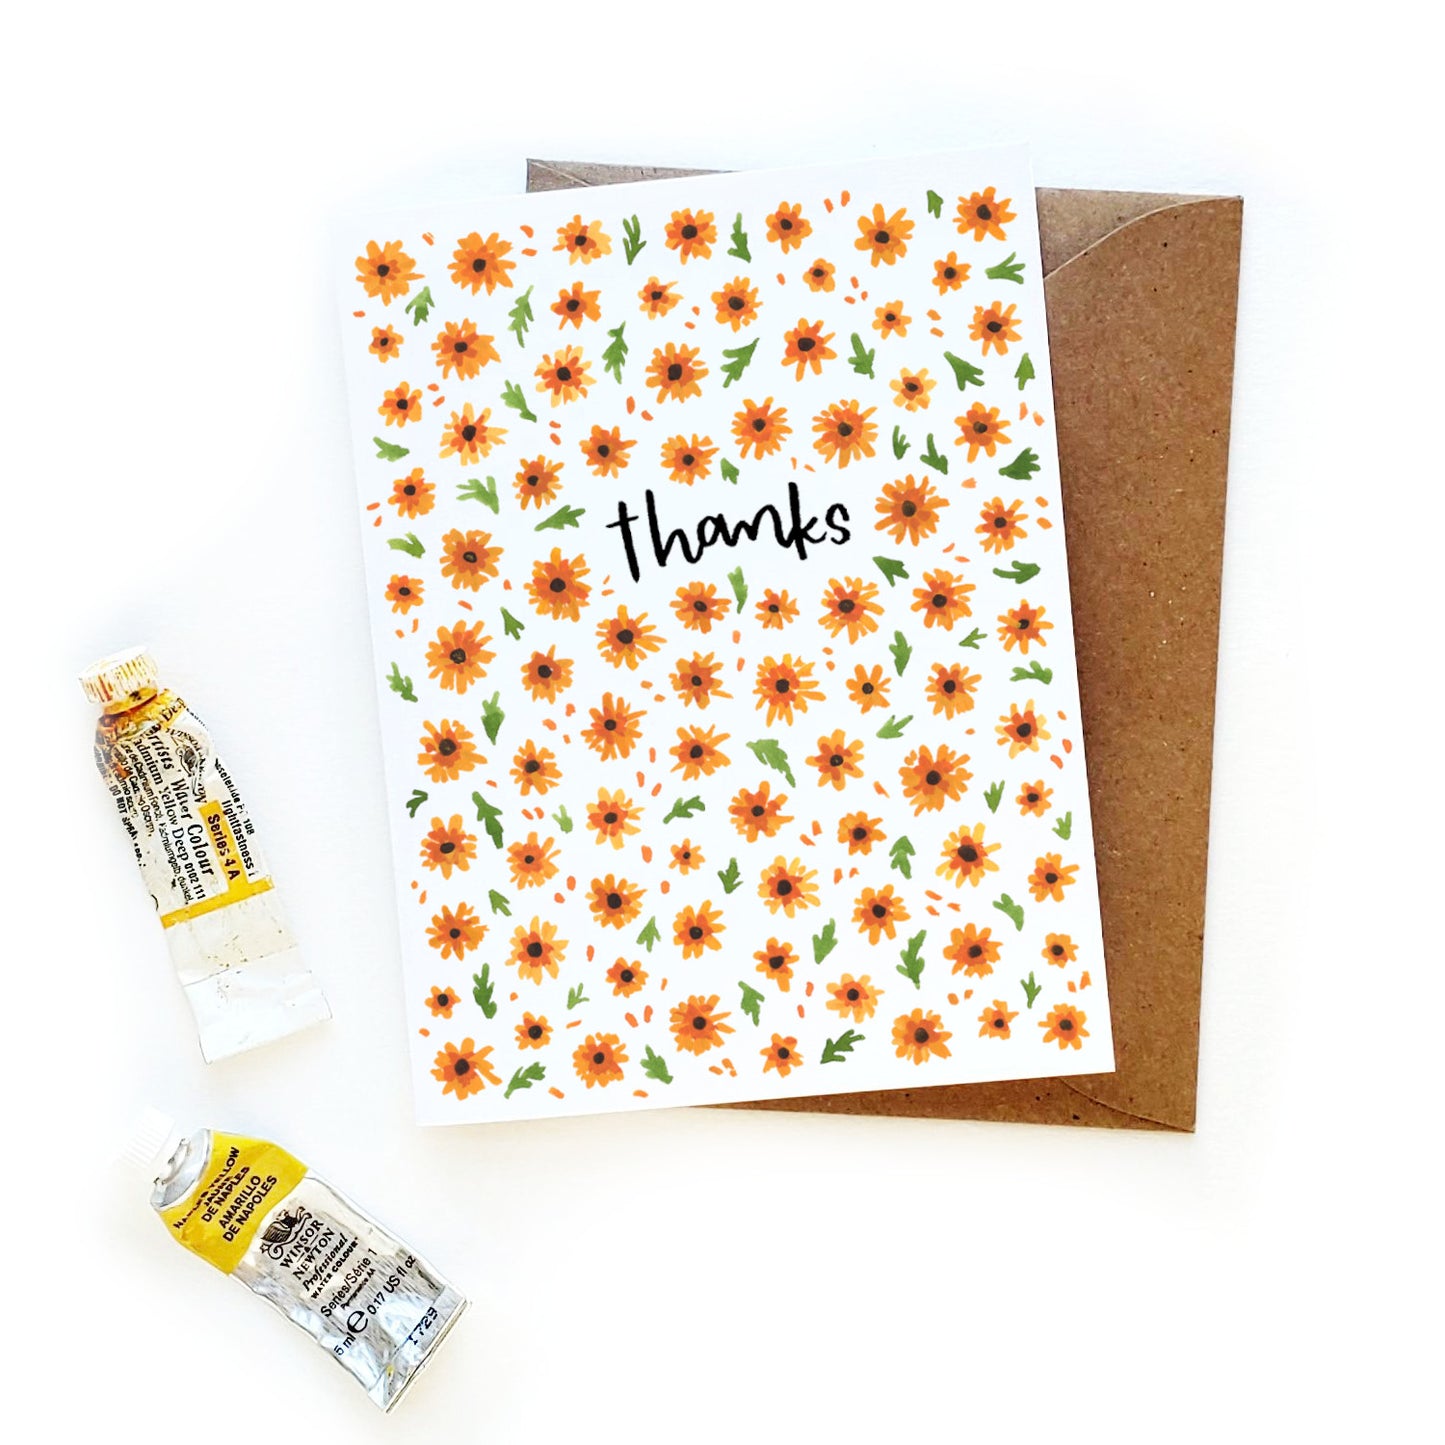 Thanks Card with Orange Cosmos